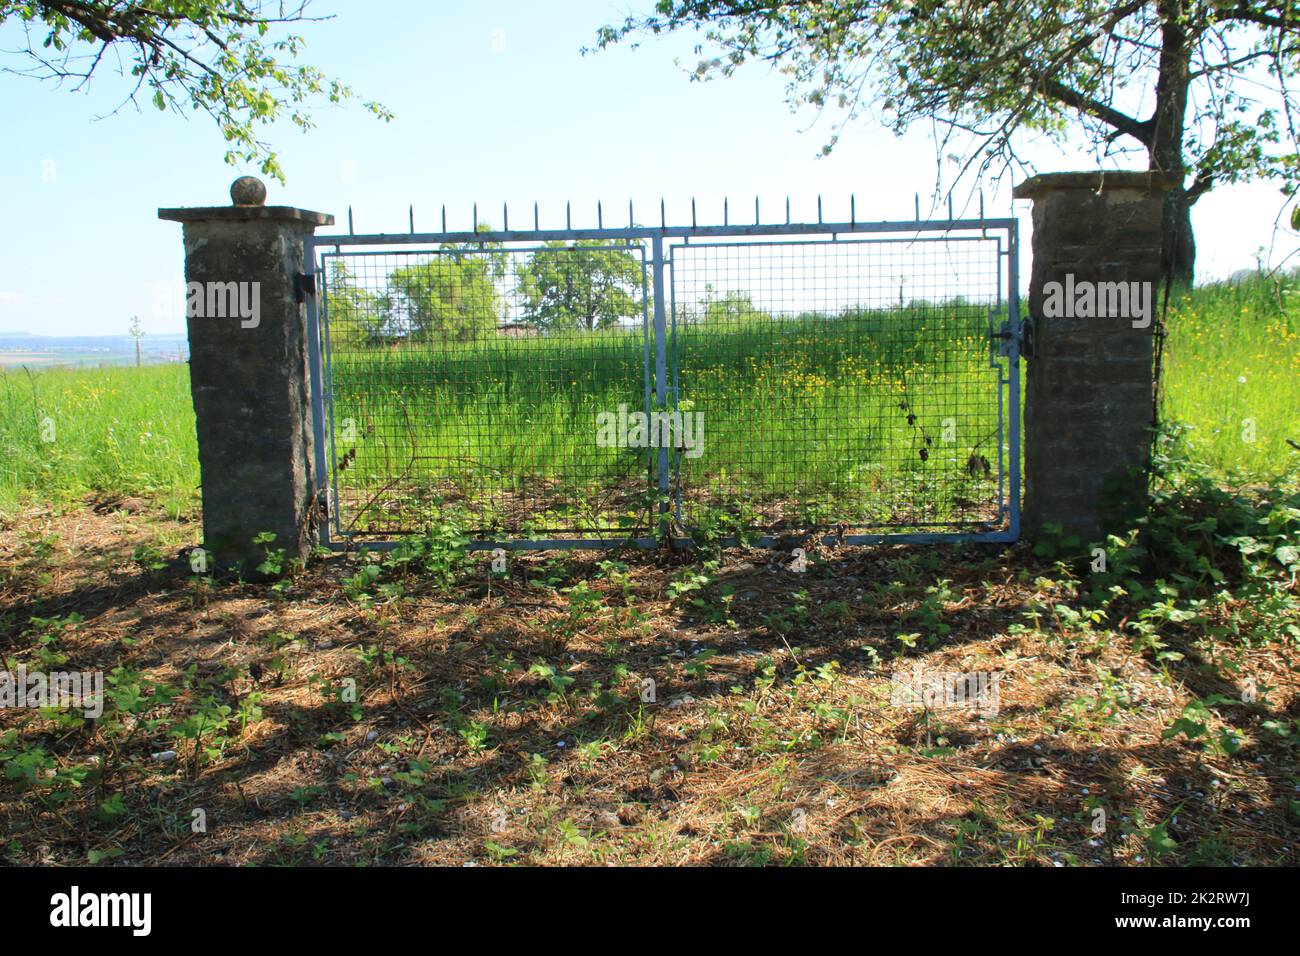 Closed single gate on a garden property Stock Photo